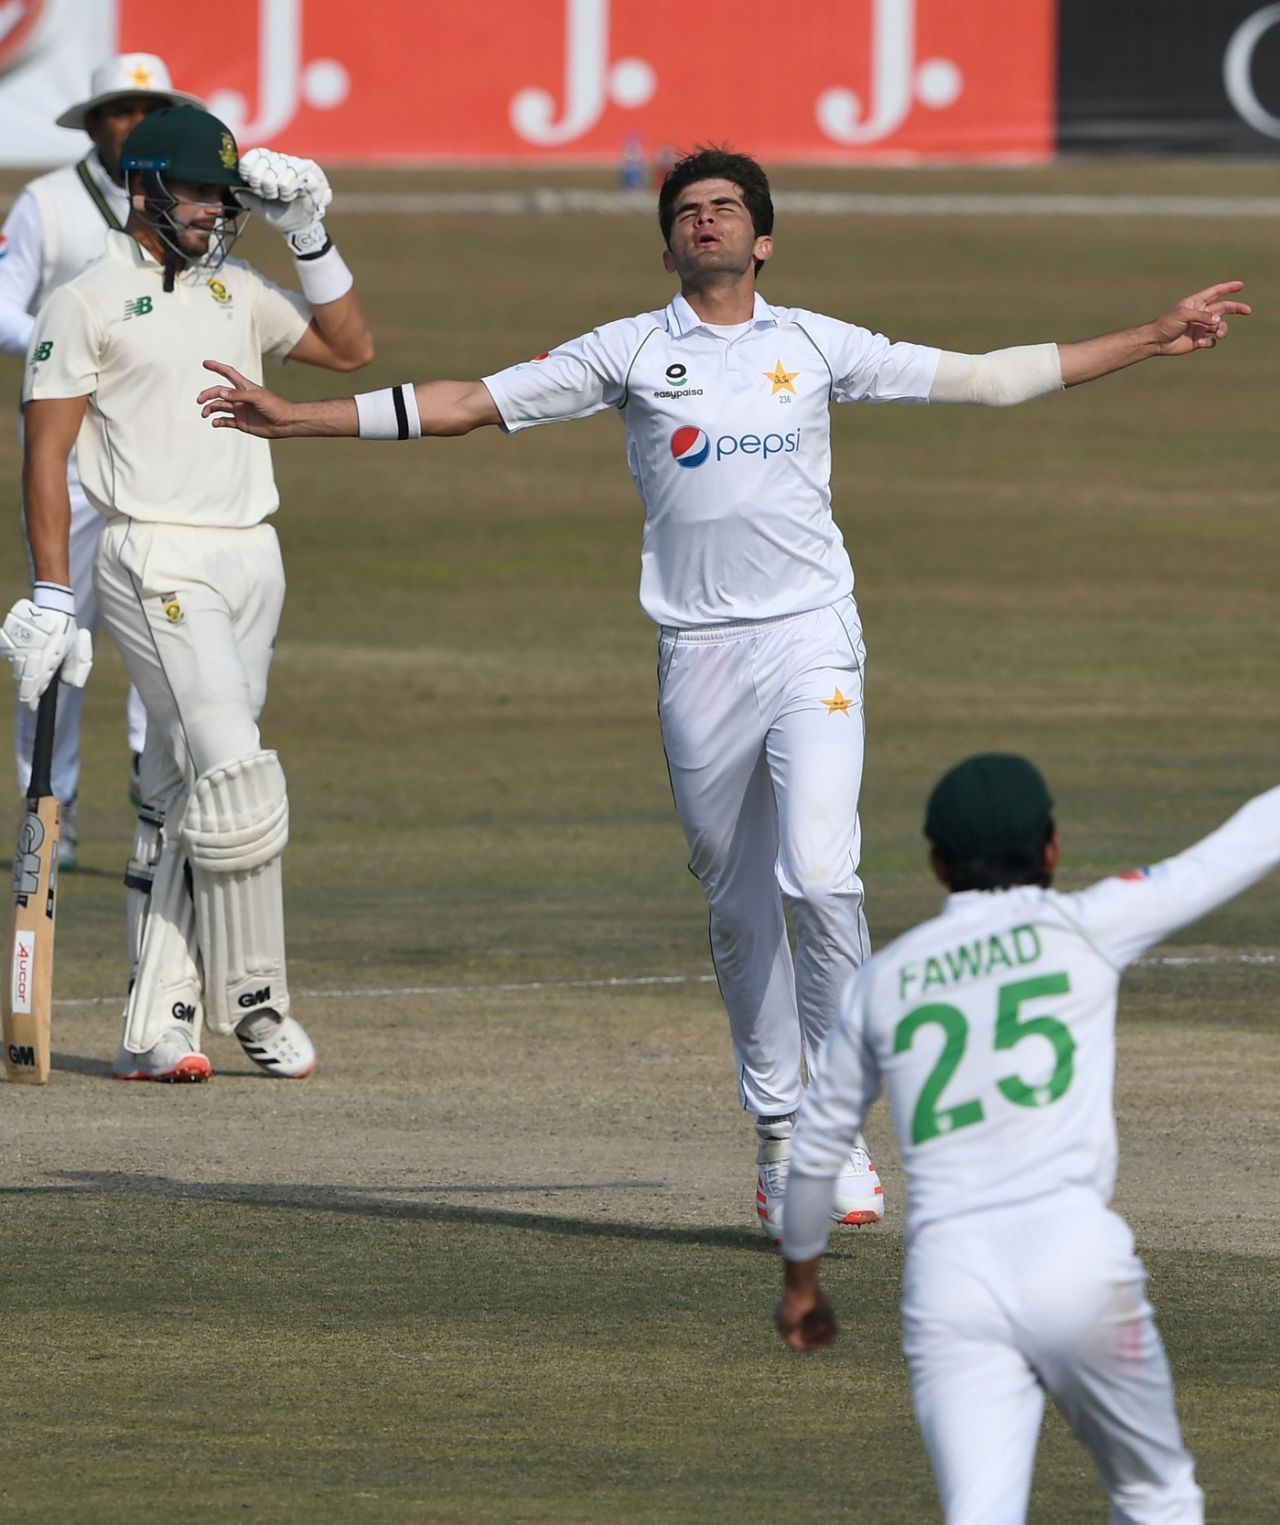 It's really cool to take wickets in a Test match as Shaheen Shah Afridi demonstrates here, Pakistan vs South Africa, 2nd Test, Rawalpindi, 4th day, February 7, 2021